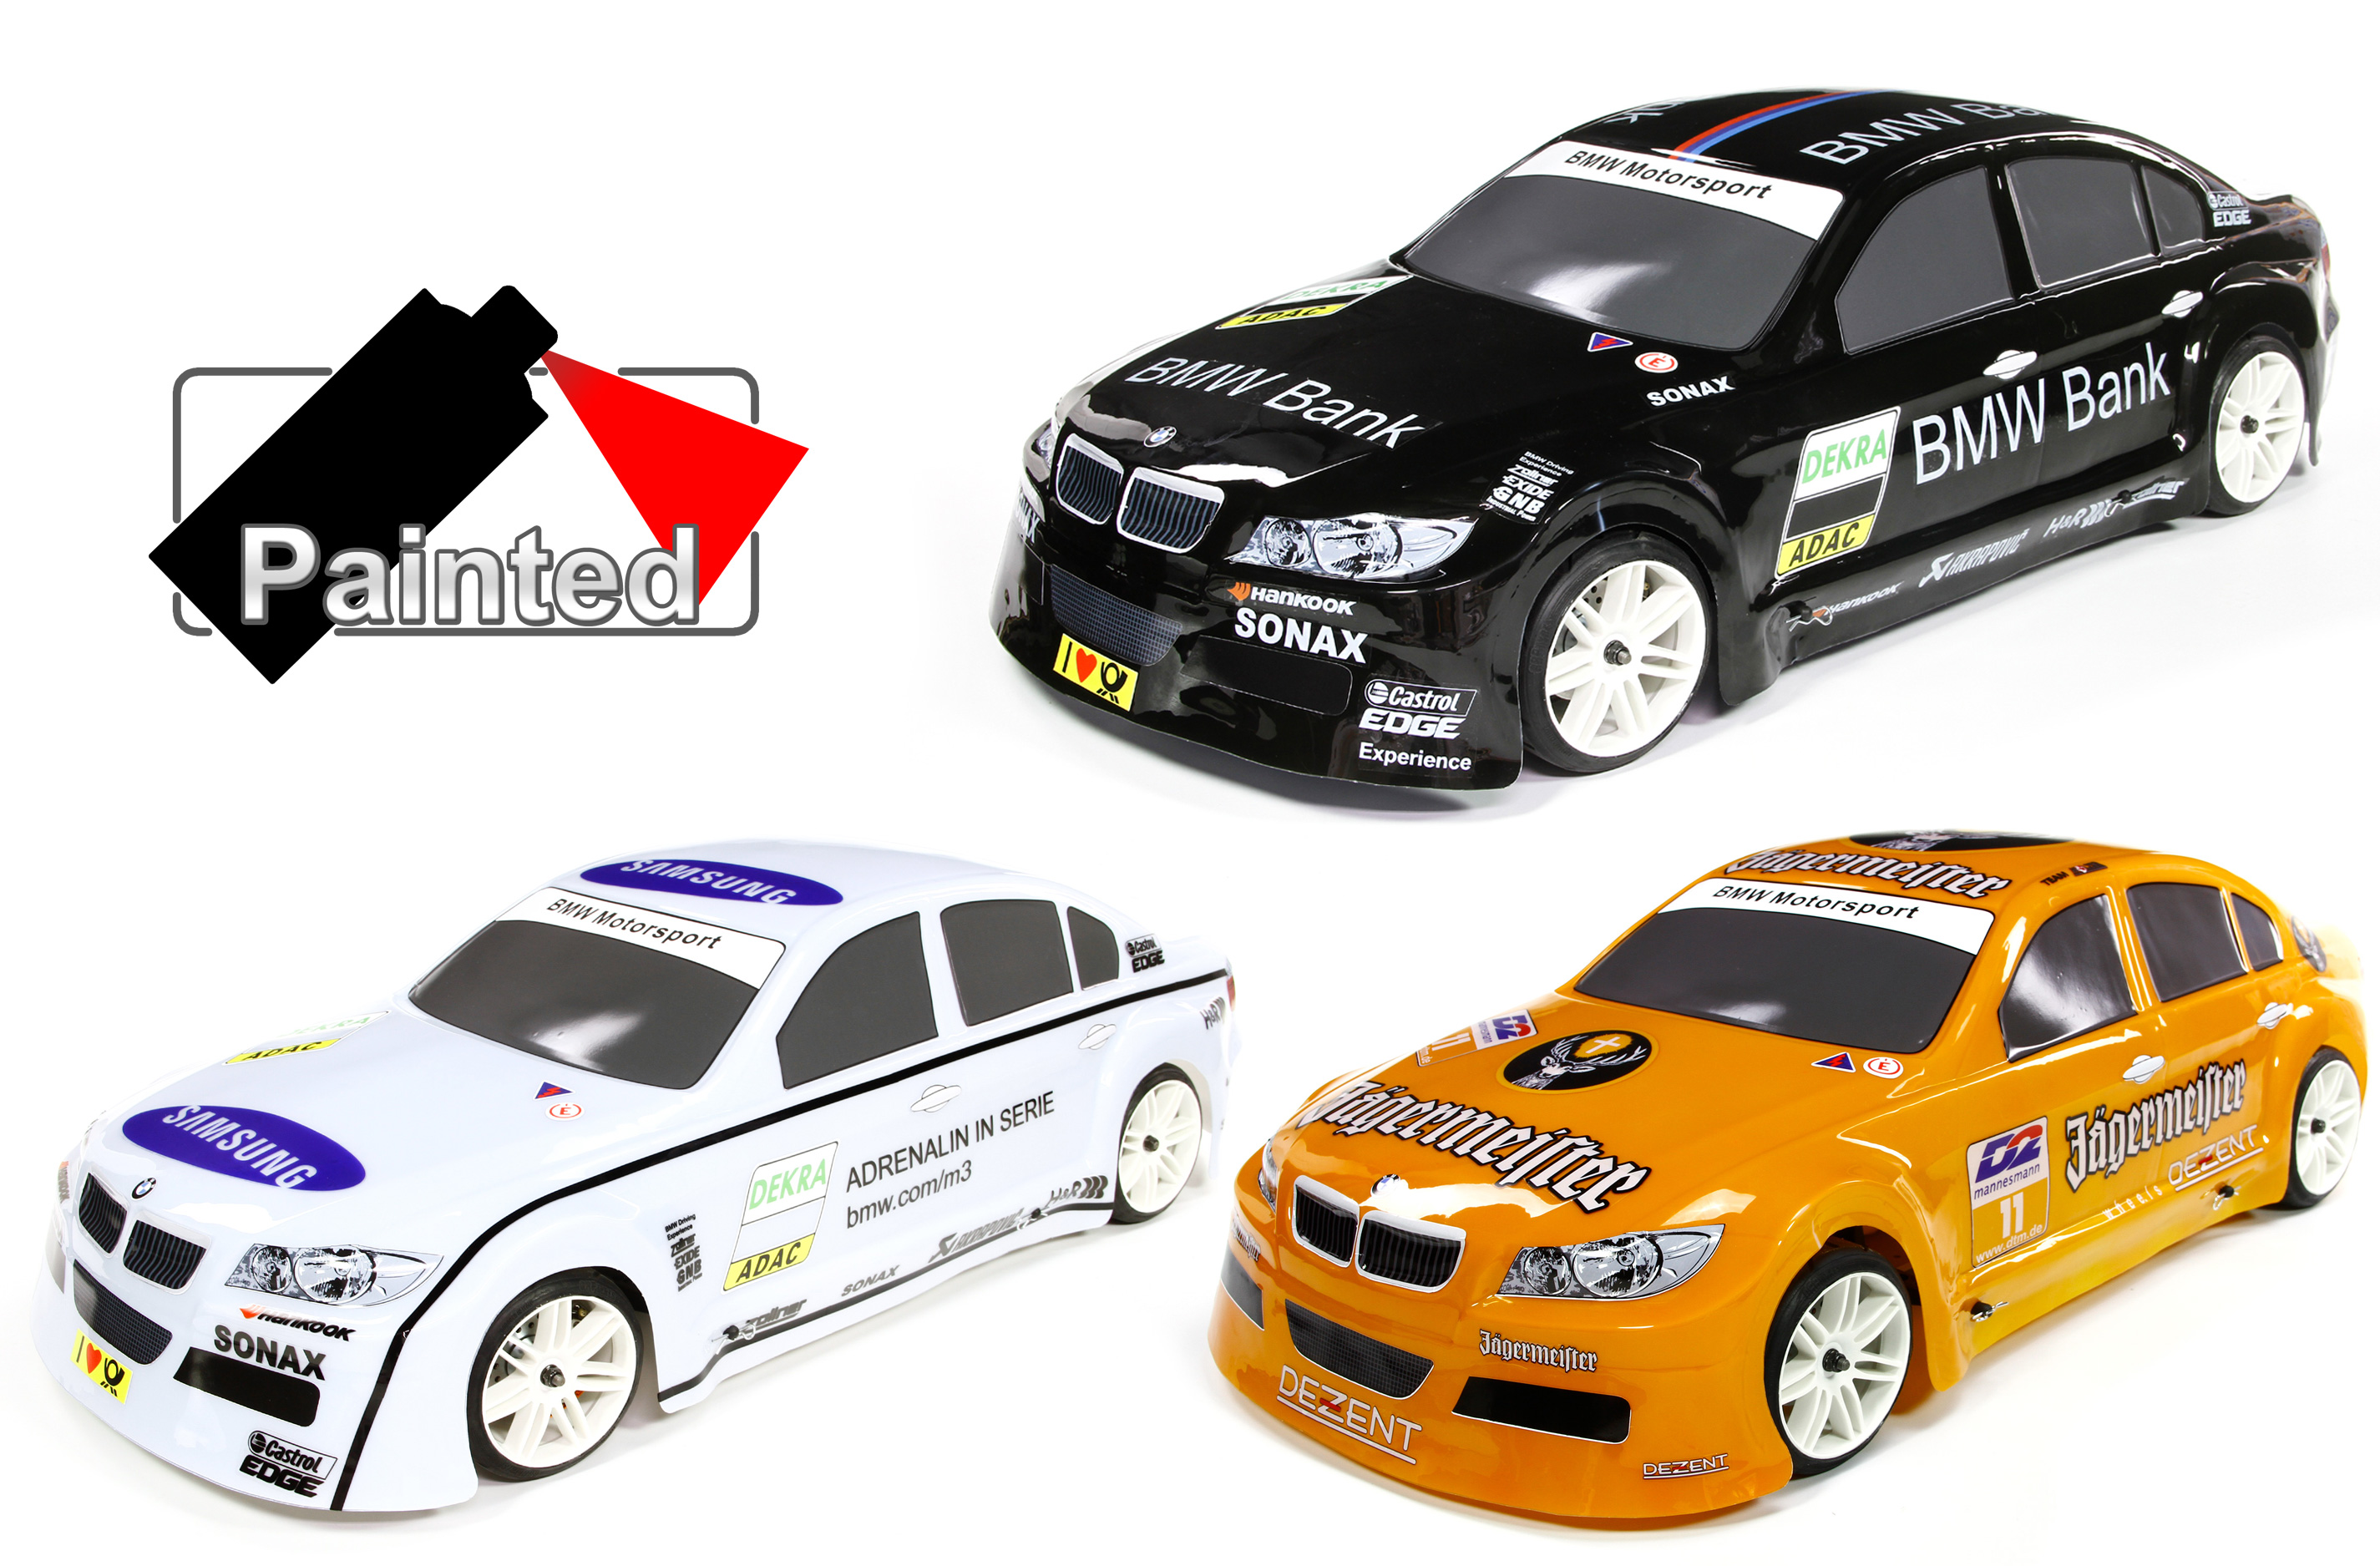 y1330 BMW 320si WTCC 1/5 body shell, painted, 535 wheelbase, choice of colors